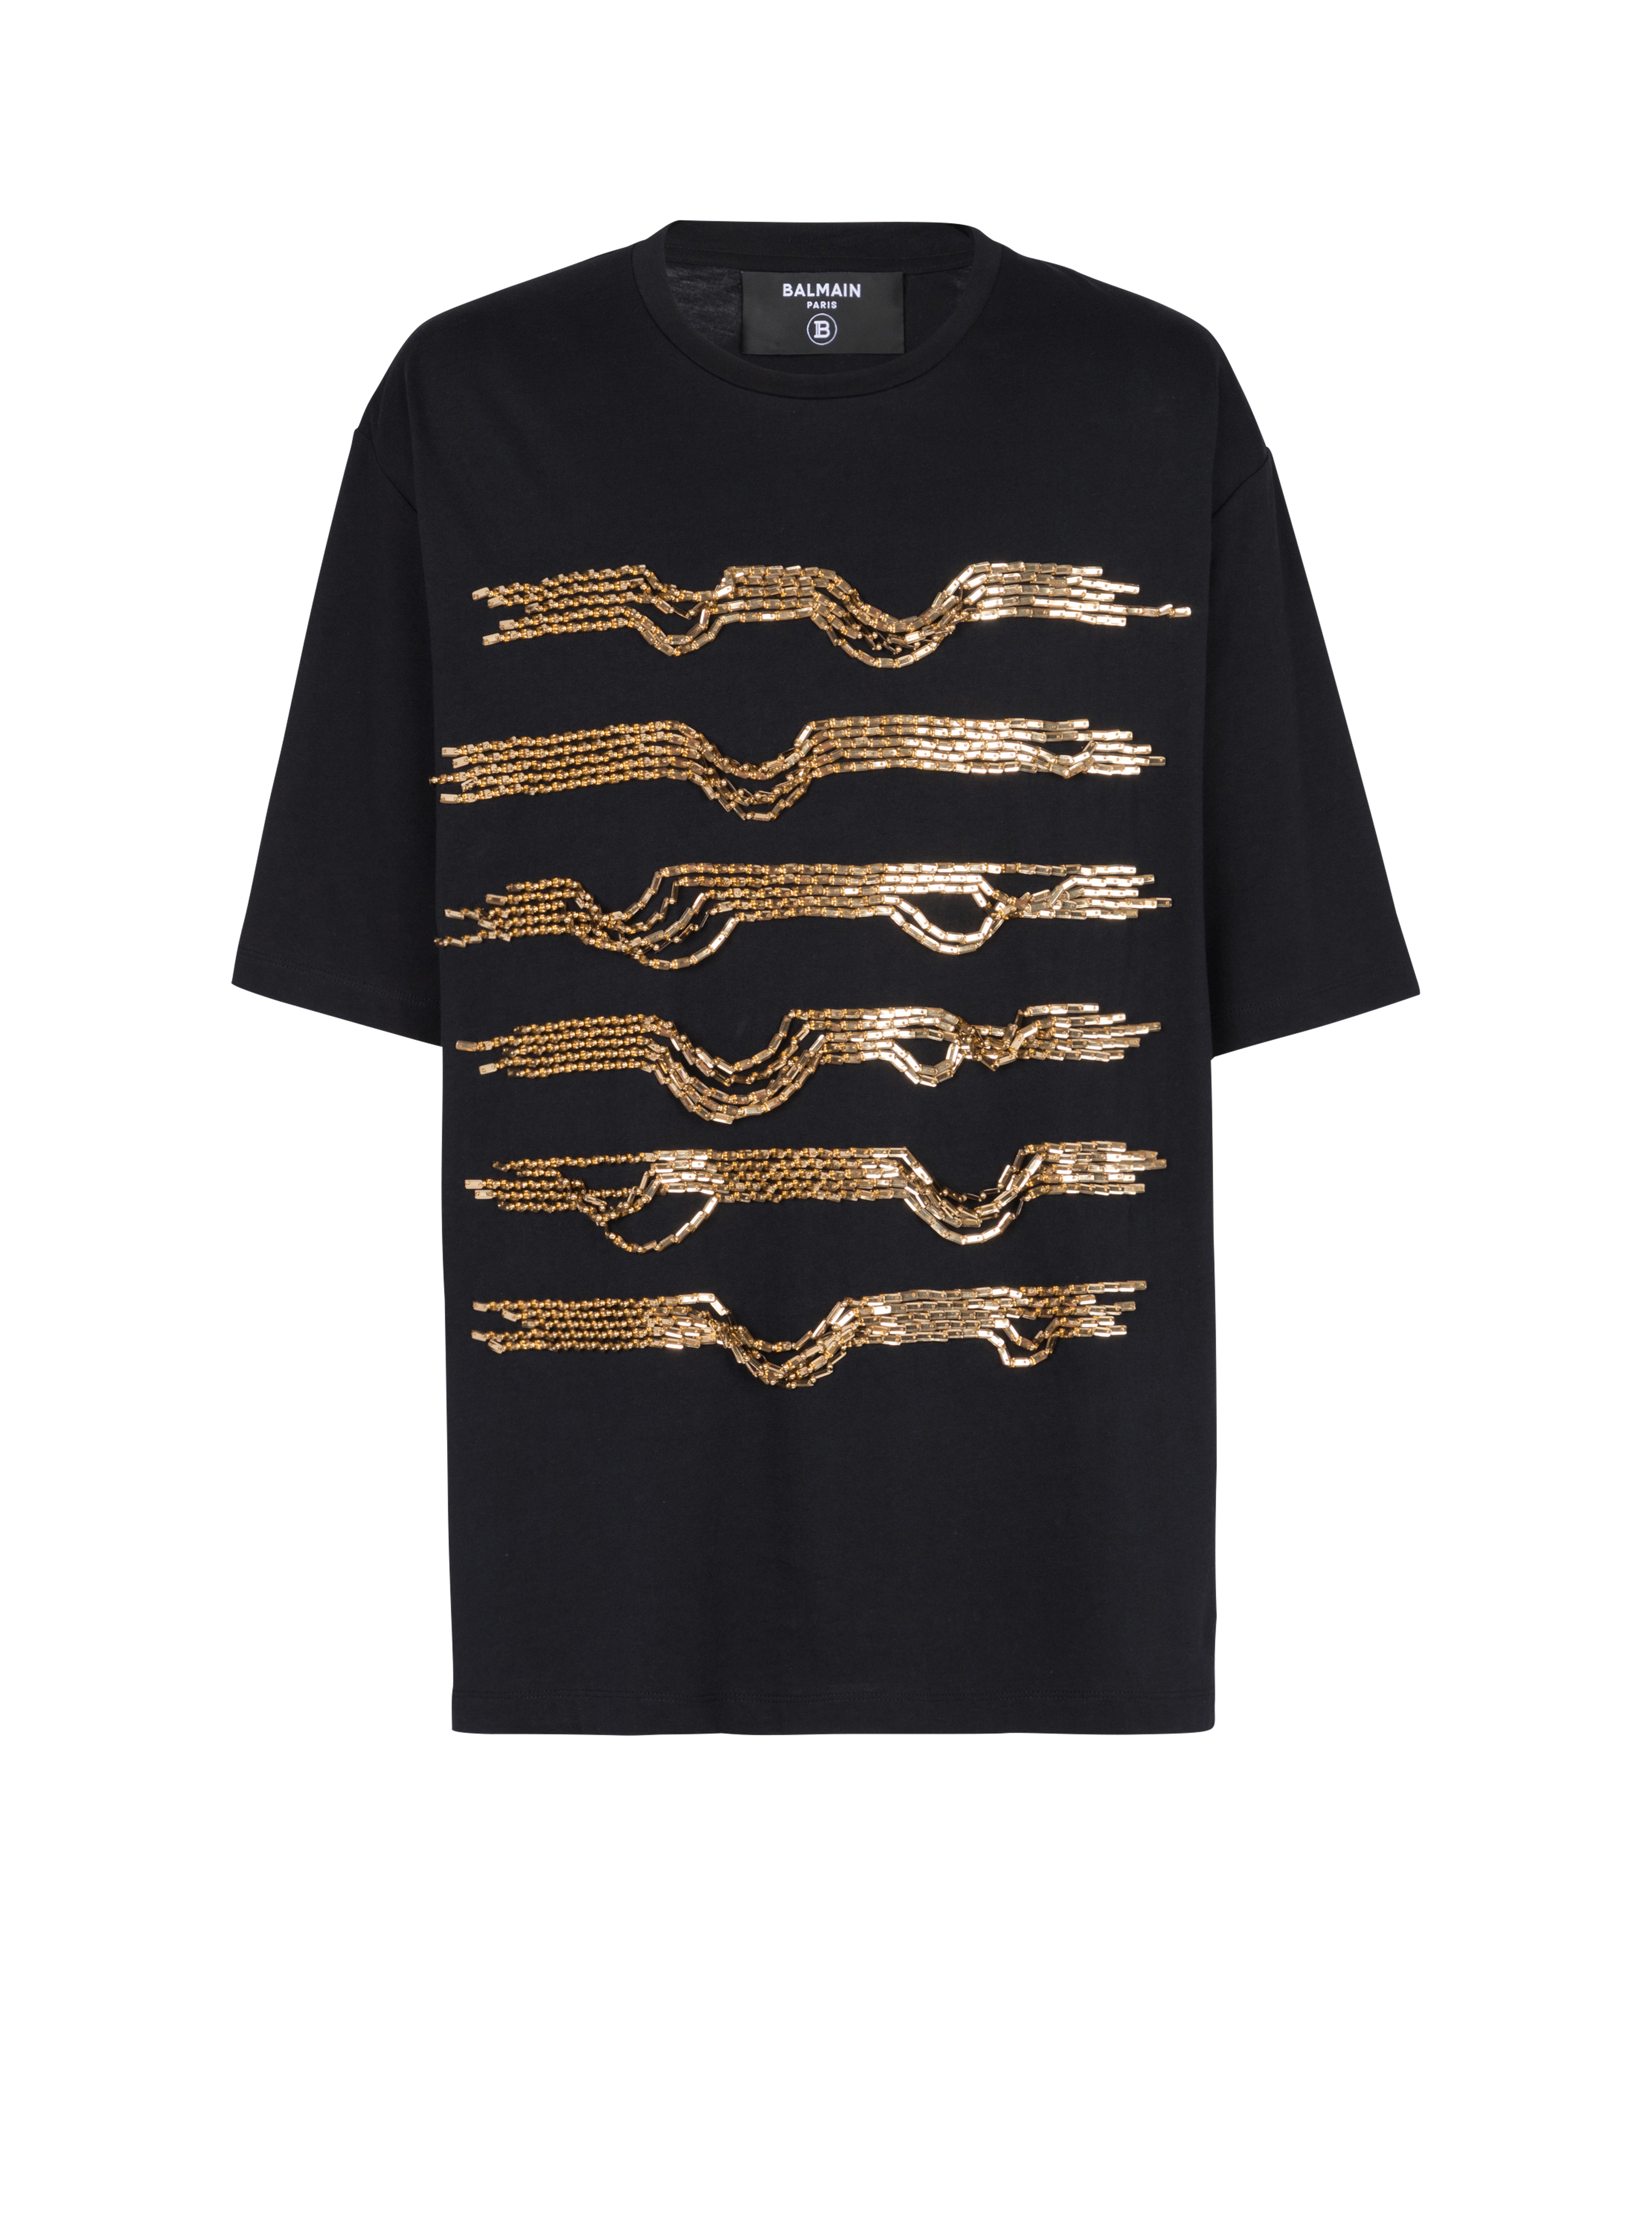 Embroidered cotton T-shirt with destroy stripes, gold